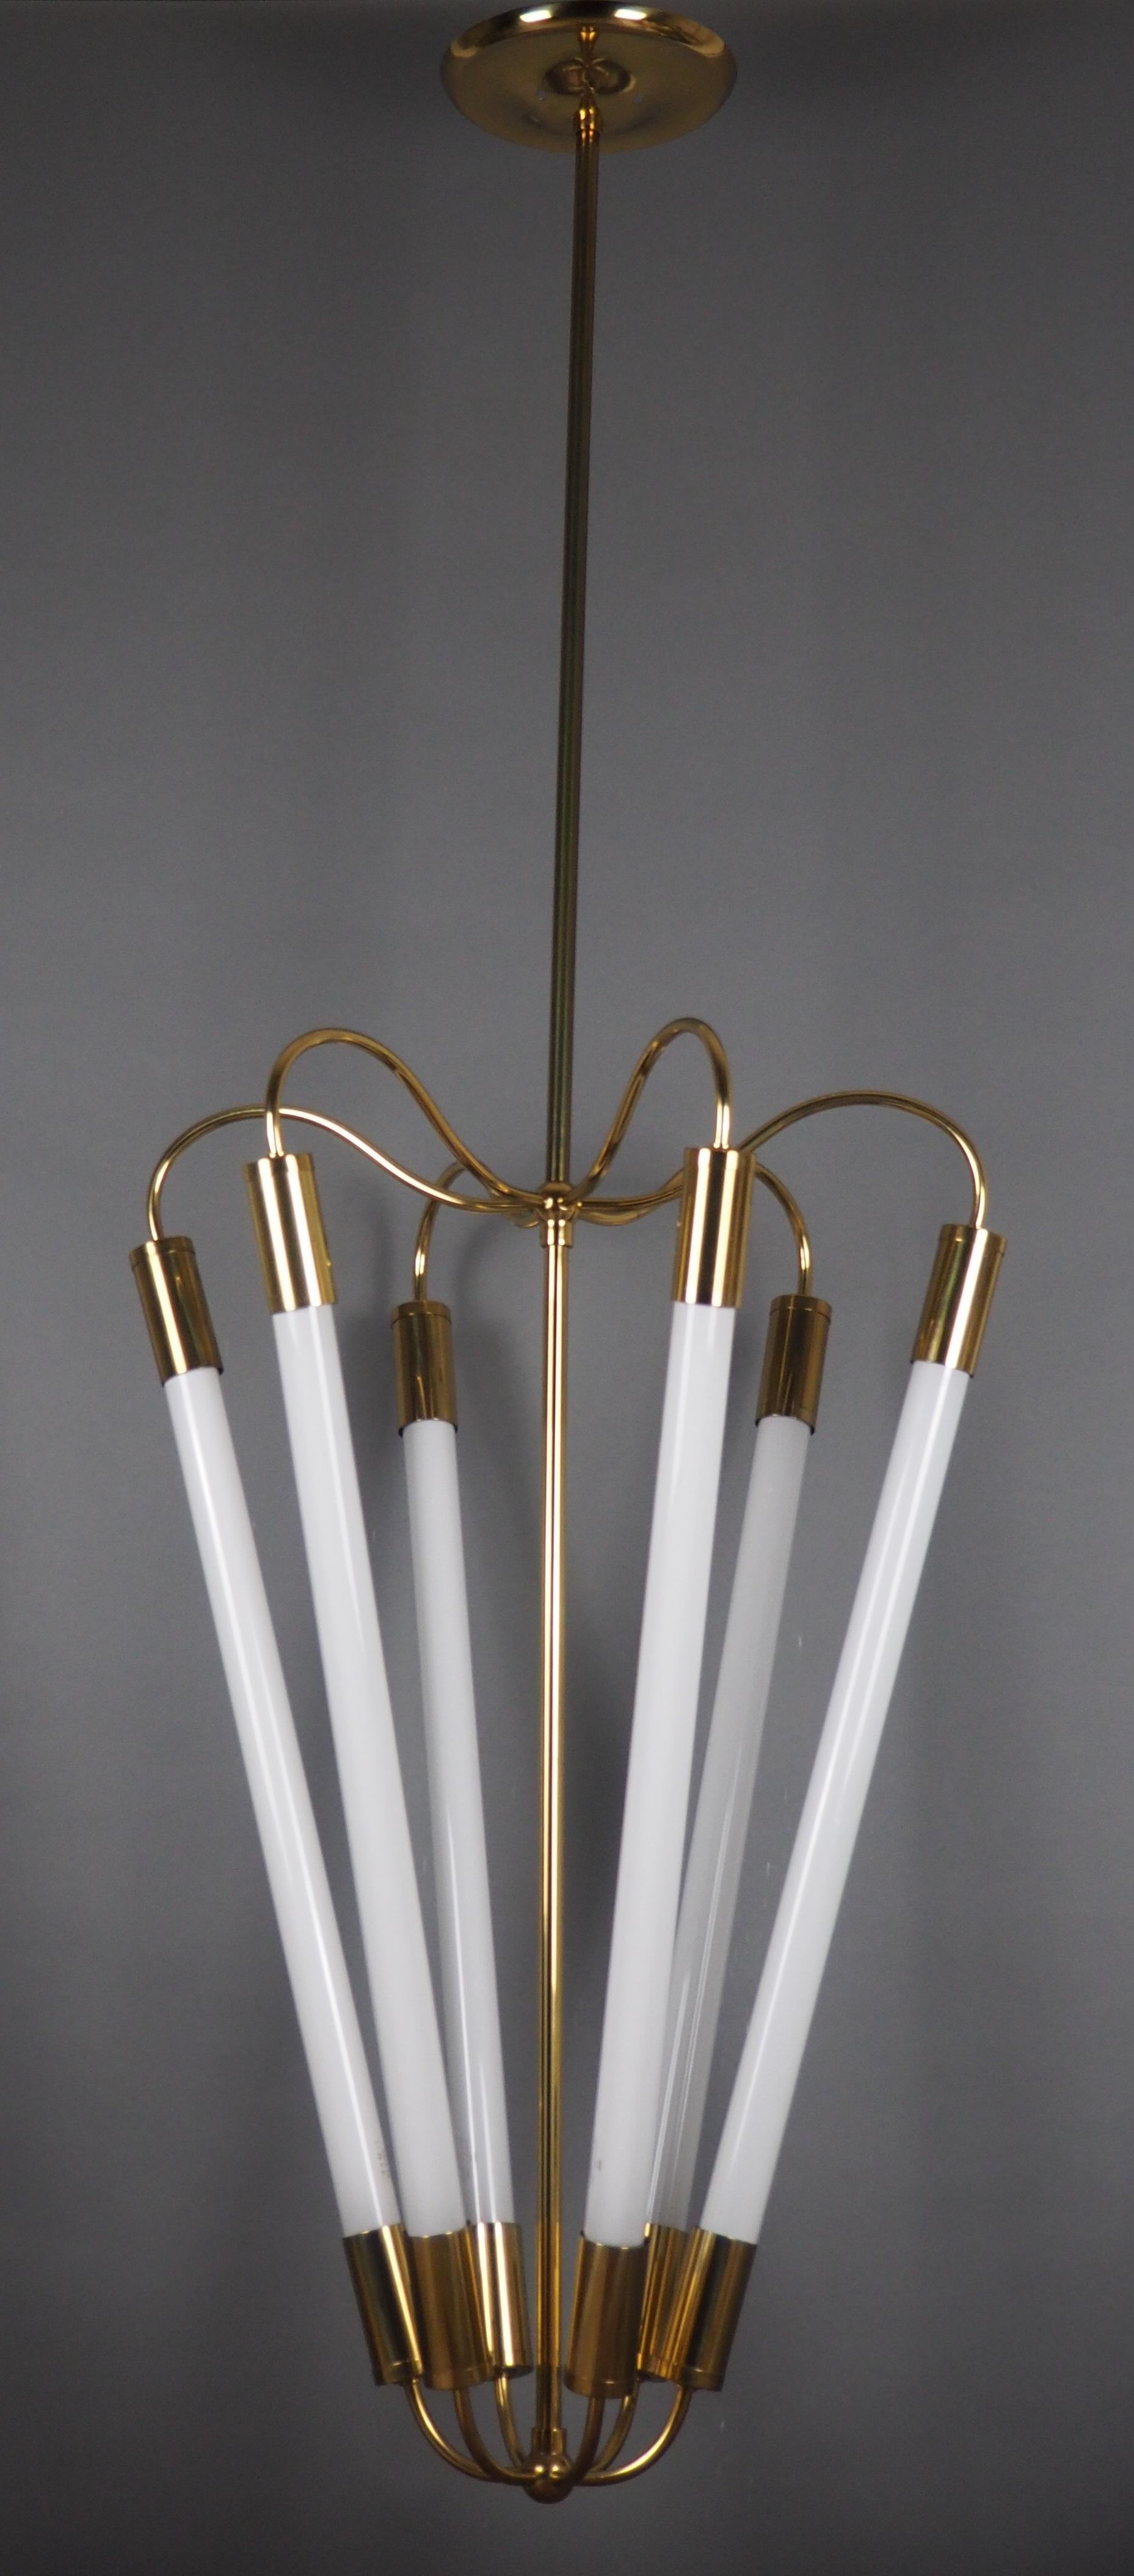 Stunning set of four Bauhaus Art Deco period polished brass chandeliers with neon tubes by Kaiser, Germany, circa 1940s.
(The height can be shorten)

The chandeliers needs each six neon L20W/ 25 tubes for illuminate and each three transorferes